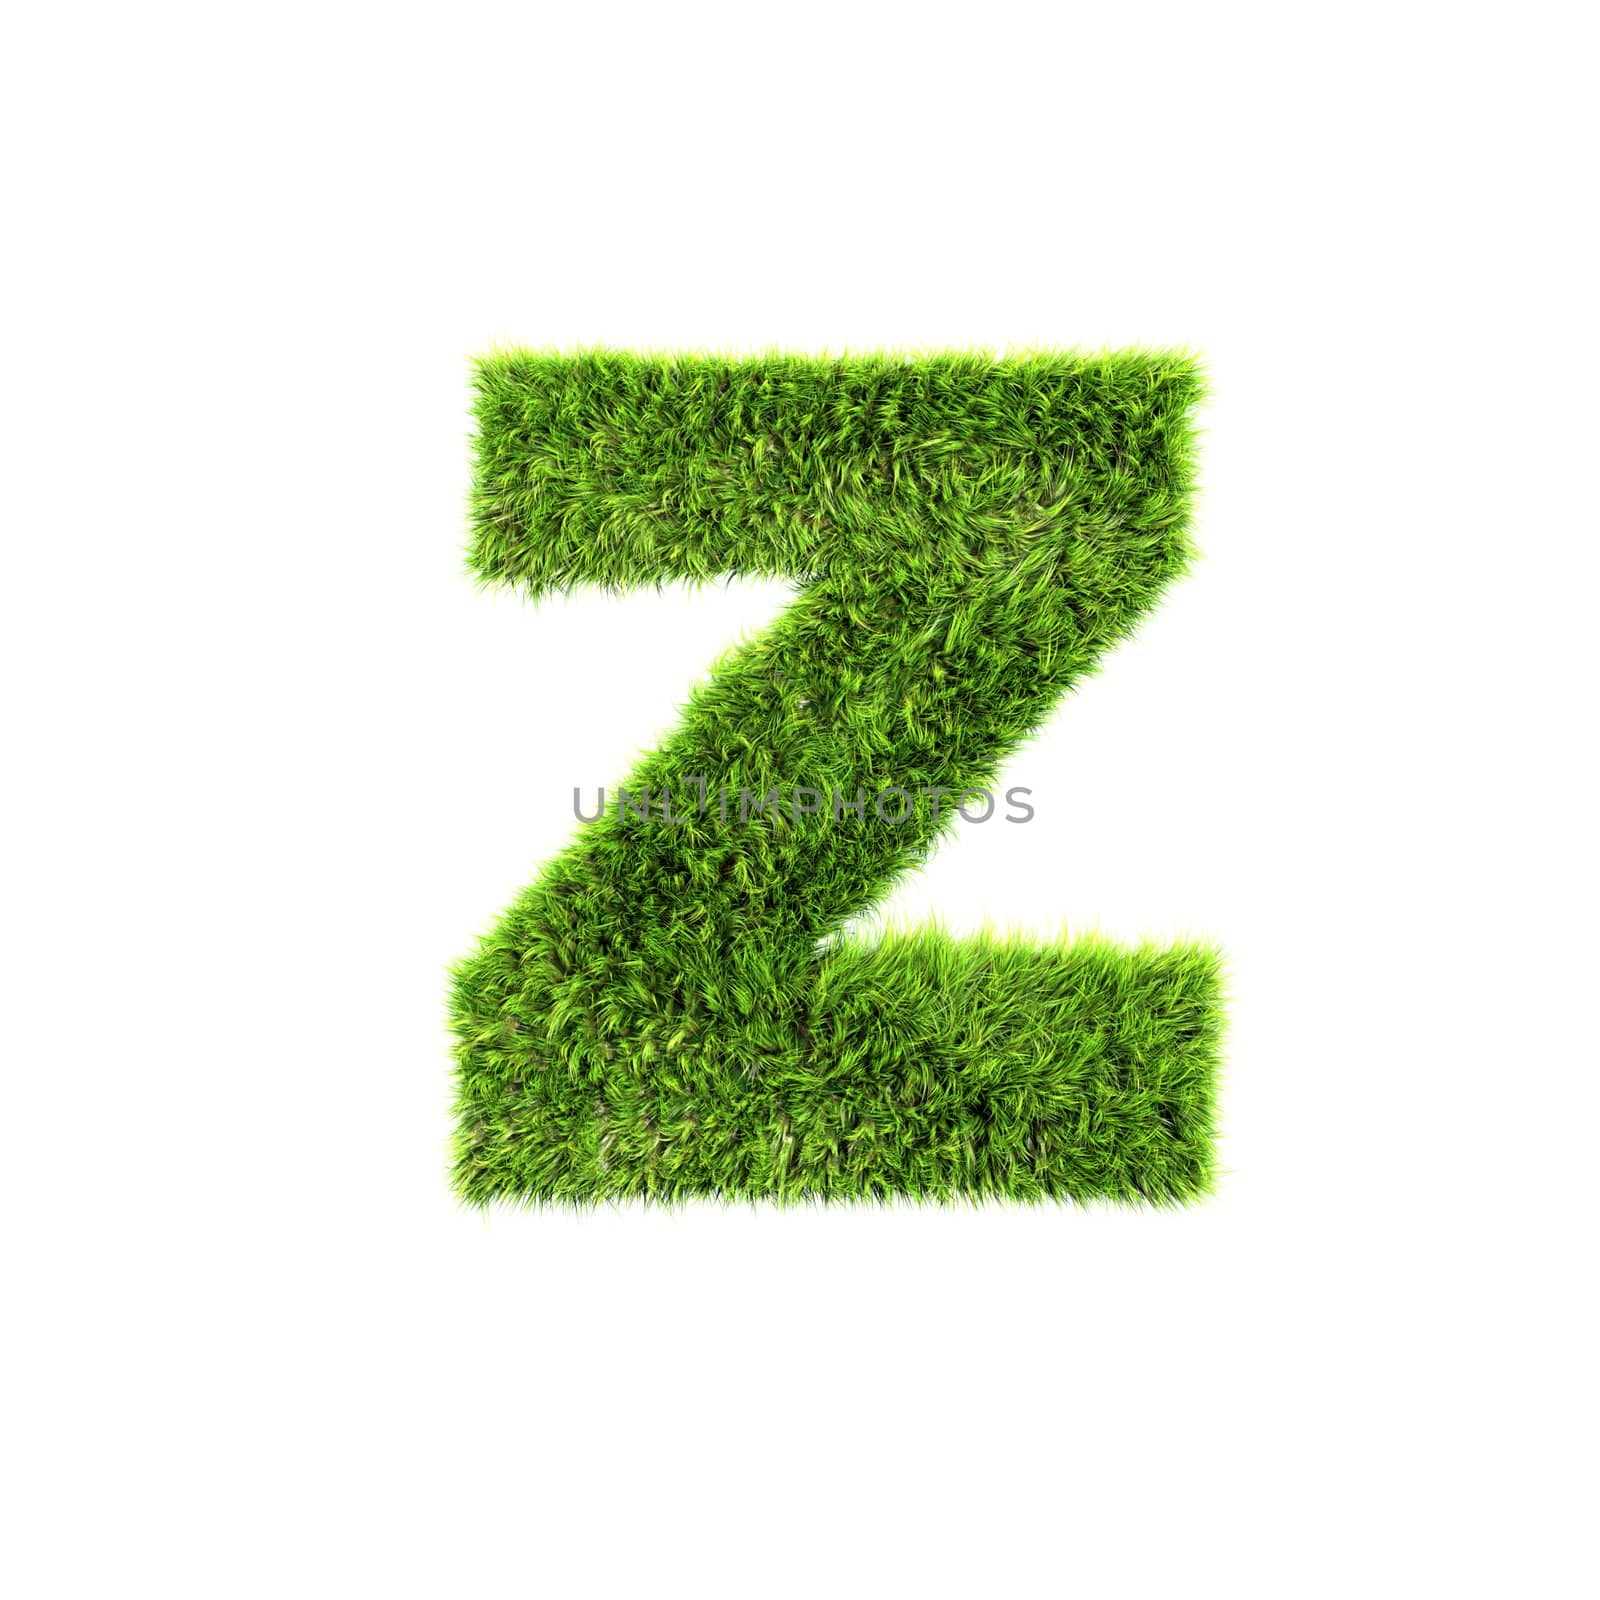 3d grass letter isolated on white background - z by chrisroll